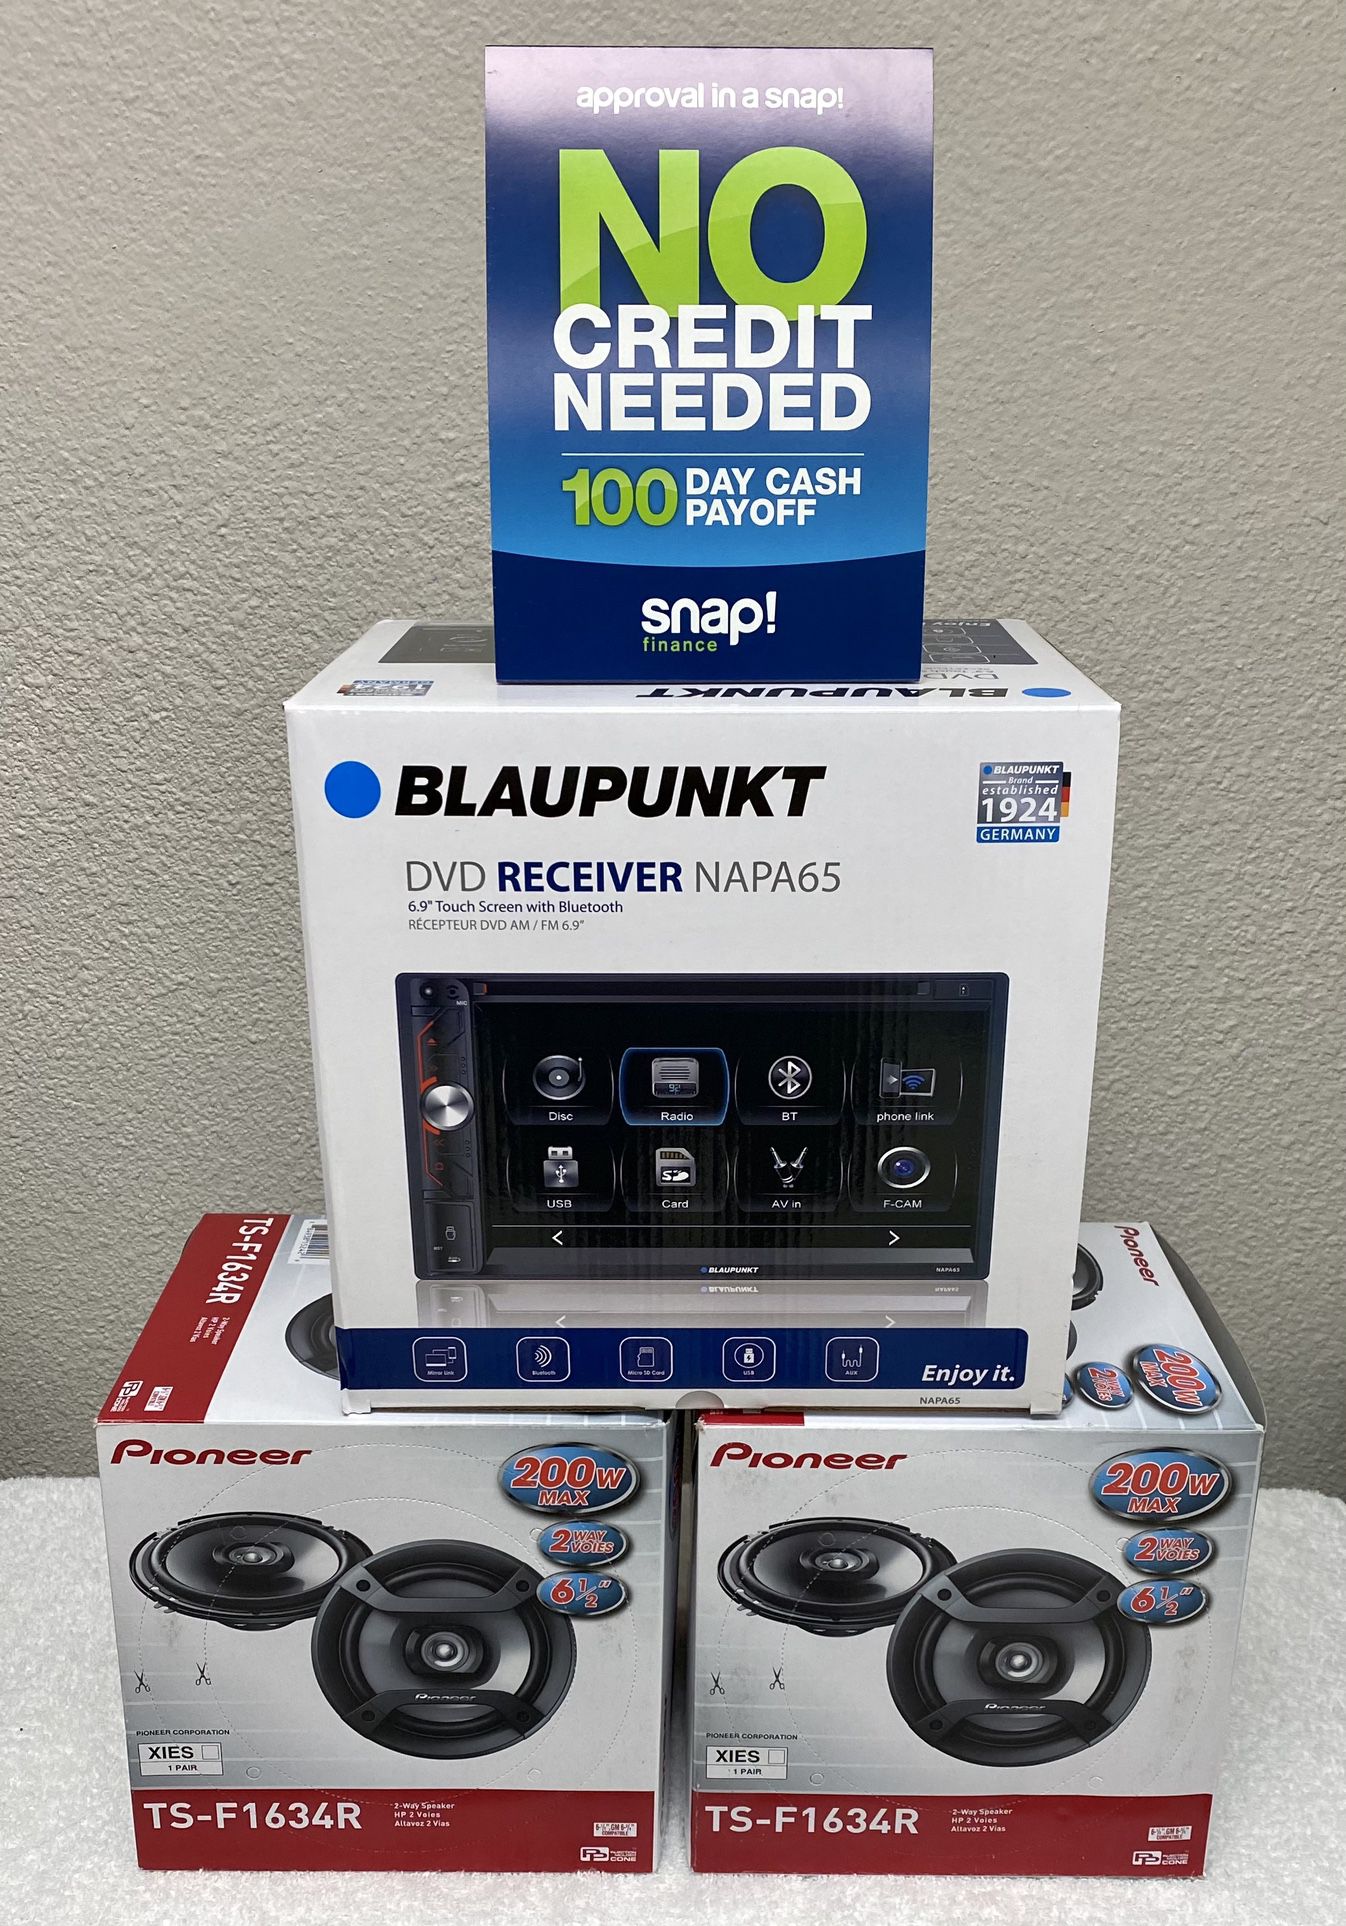 New Blaupunkt 6.9” inch LCD Double Din Touch Screen w/ BLUETOOTH DVD/CD/AUX/USB Receiver + (4) Pioneer 6.5” Speakers {No Credit Easy Financing} 🔊🤑